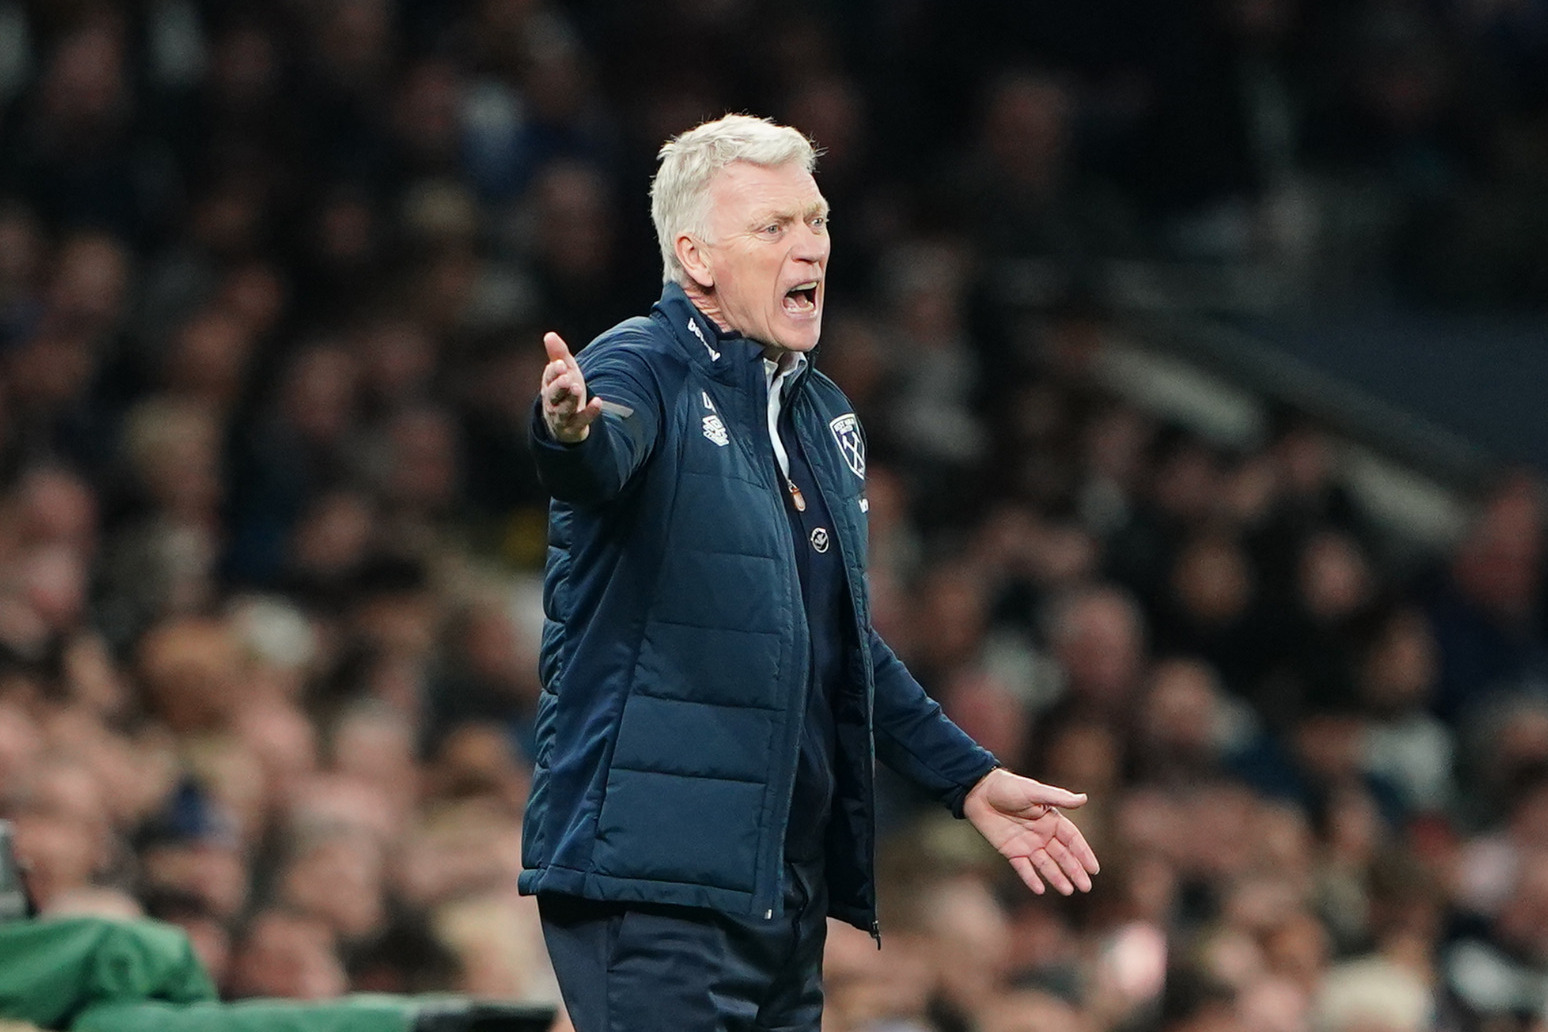 David Moyes has backing of West Ham board despite dropping into relegation zone 